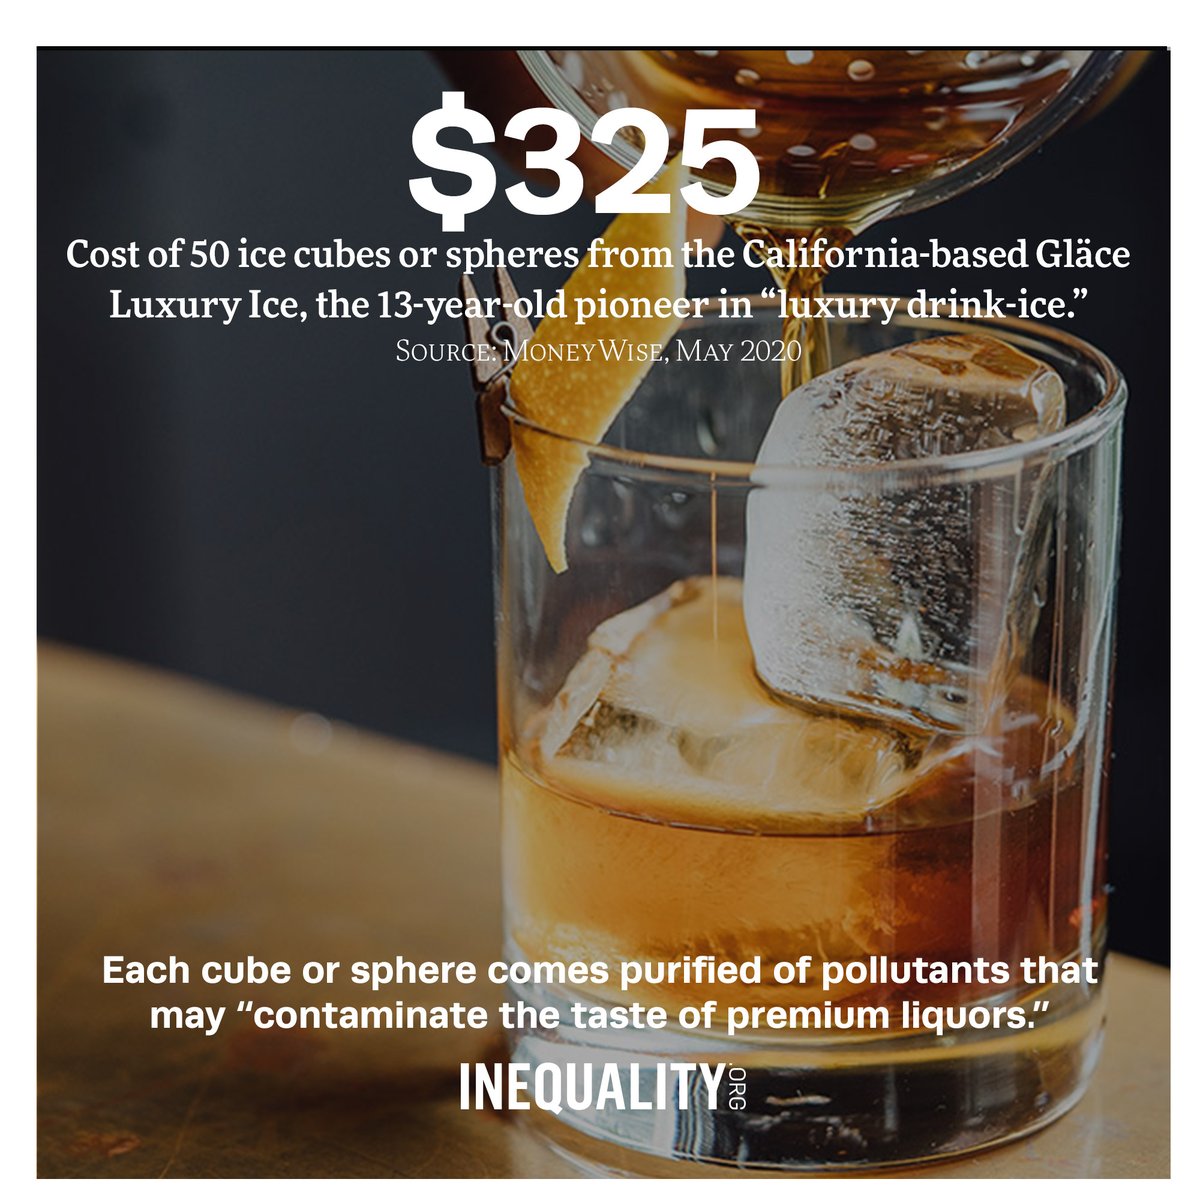 Inequality.org on Twitter: "$325: The cost of 50 ice cubes or spheres from the California-based Luxury Ice, the 13-year-old pioneer in "luxury drink-ice." Each cube or sphere comes of pollutants